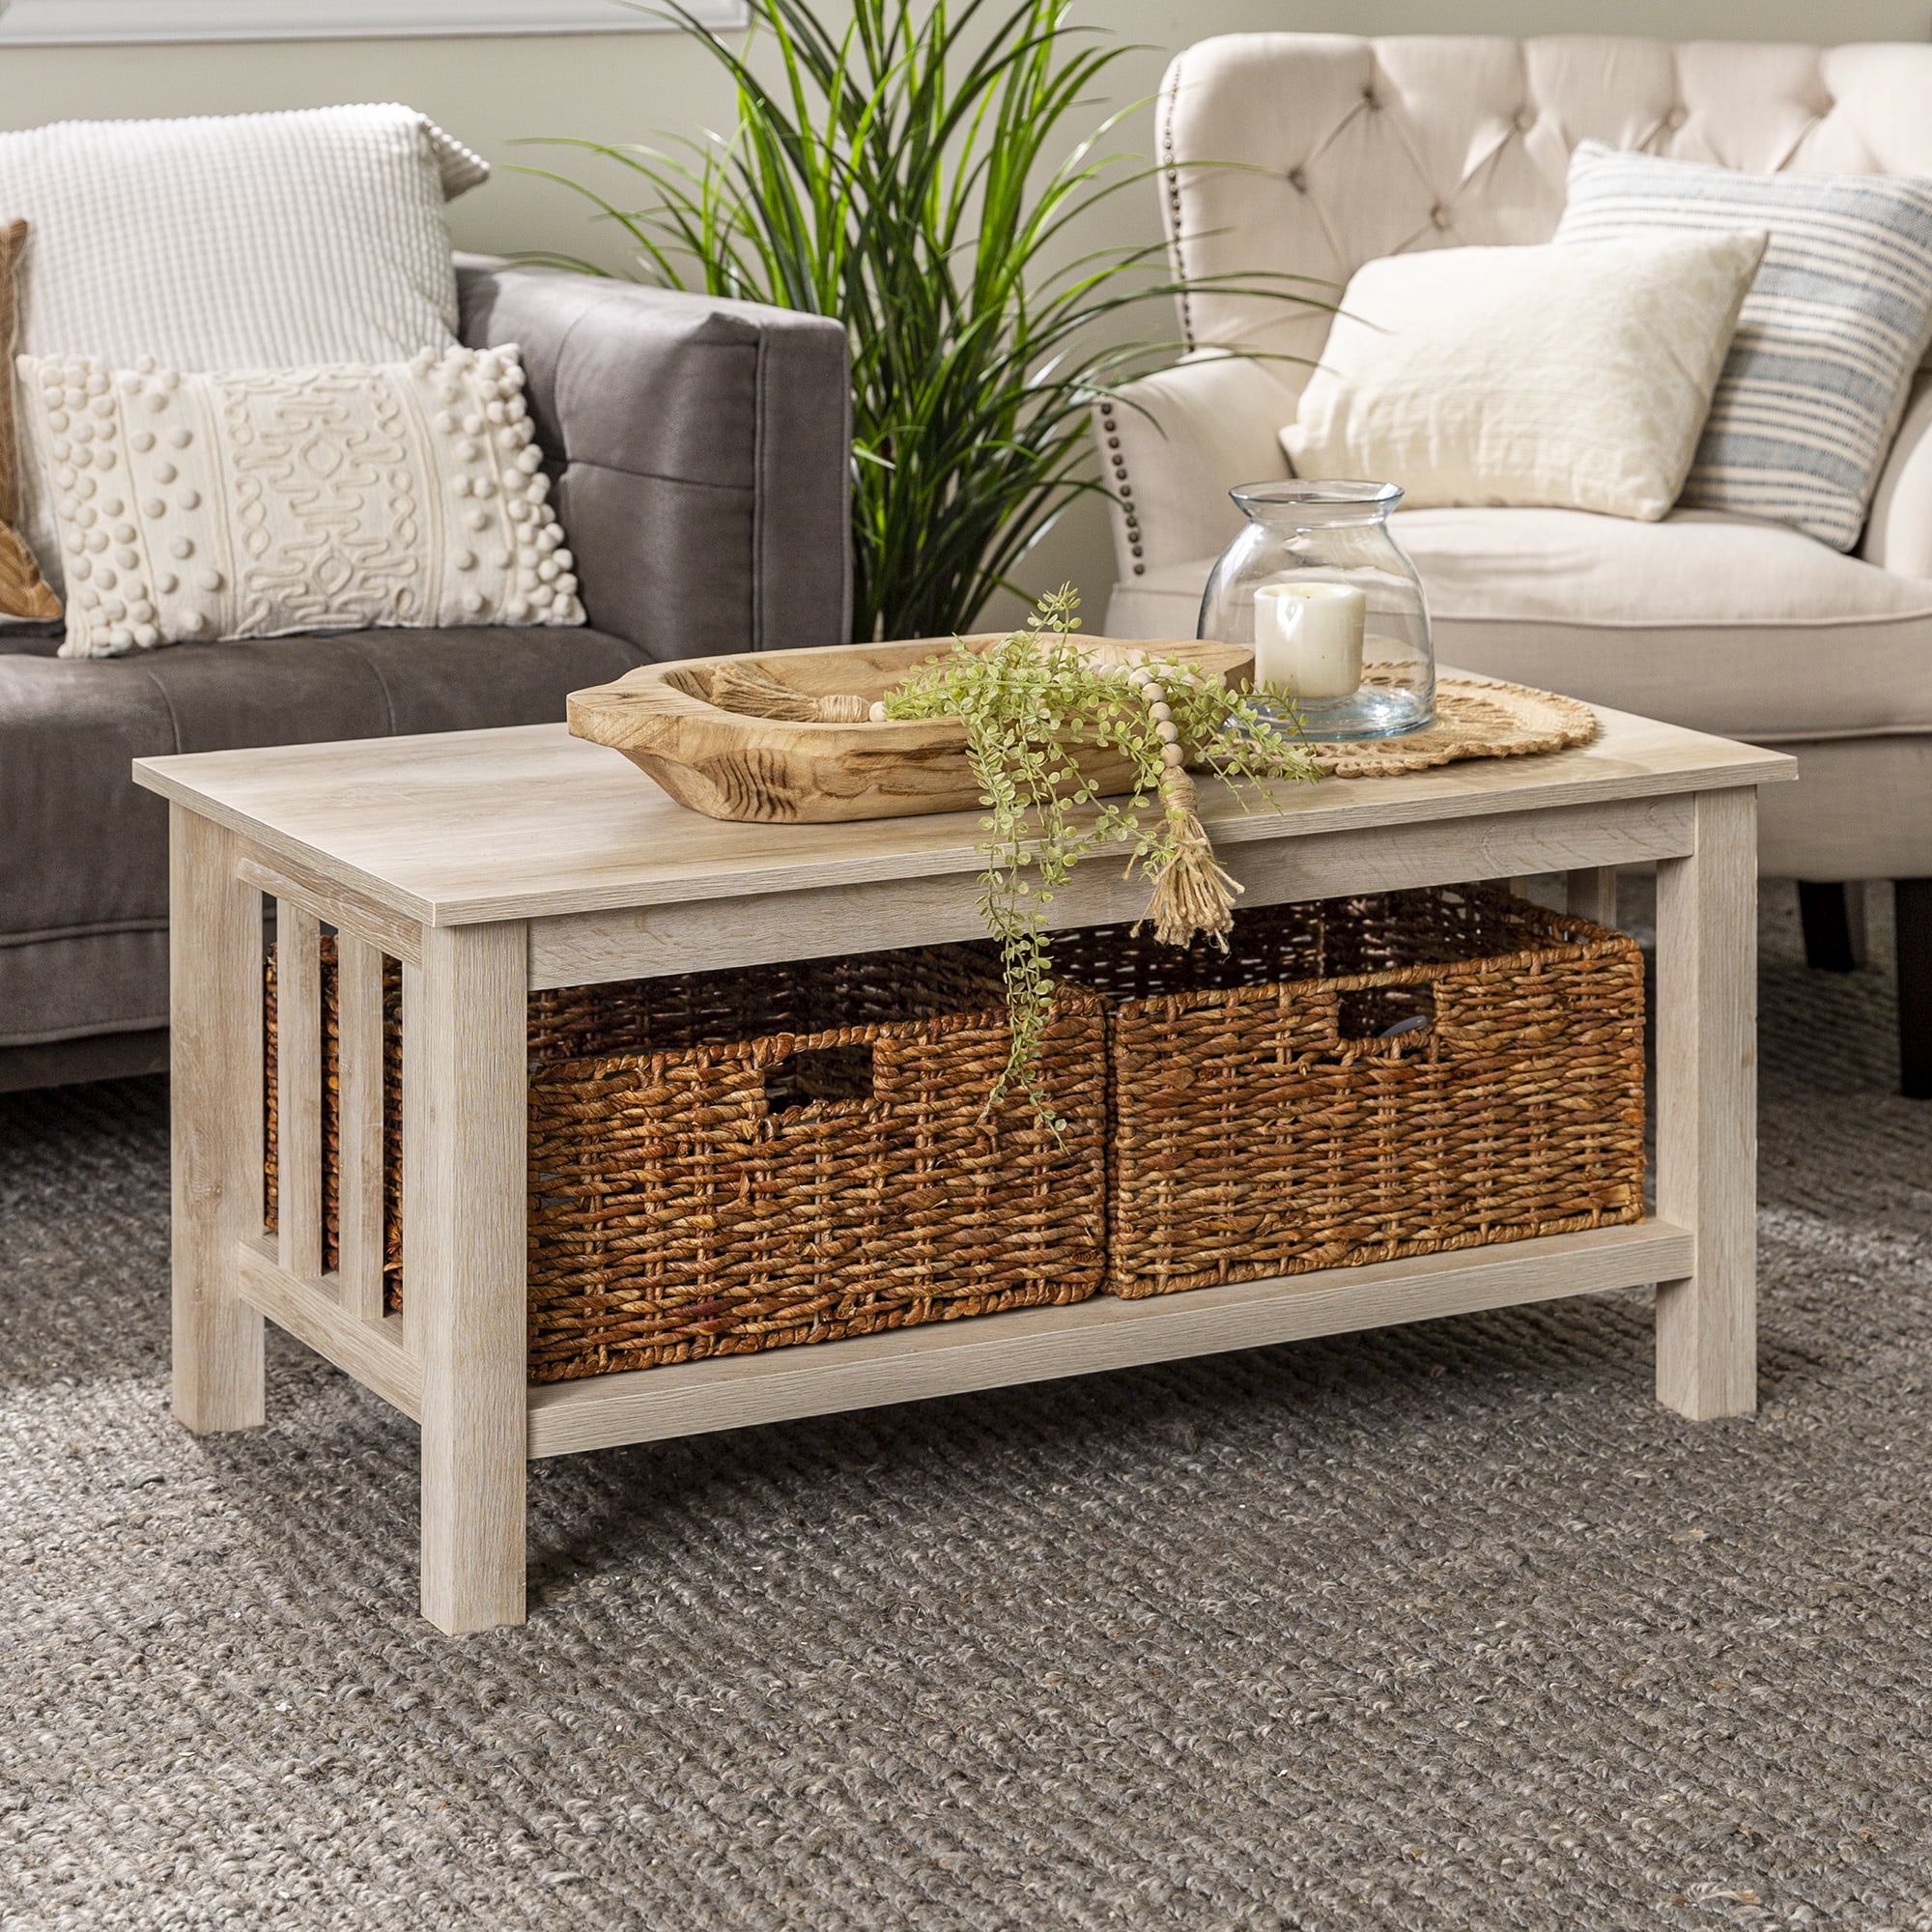 Woven Paths Traditional Storage Coffee Table With Bins, White Oak For Woven Paths Coffee Tables (View 3 of 20)